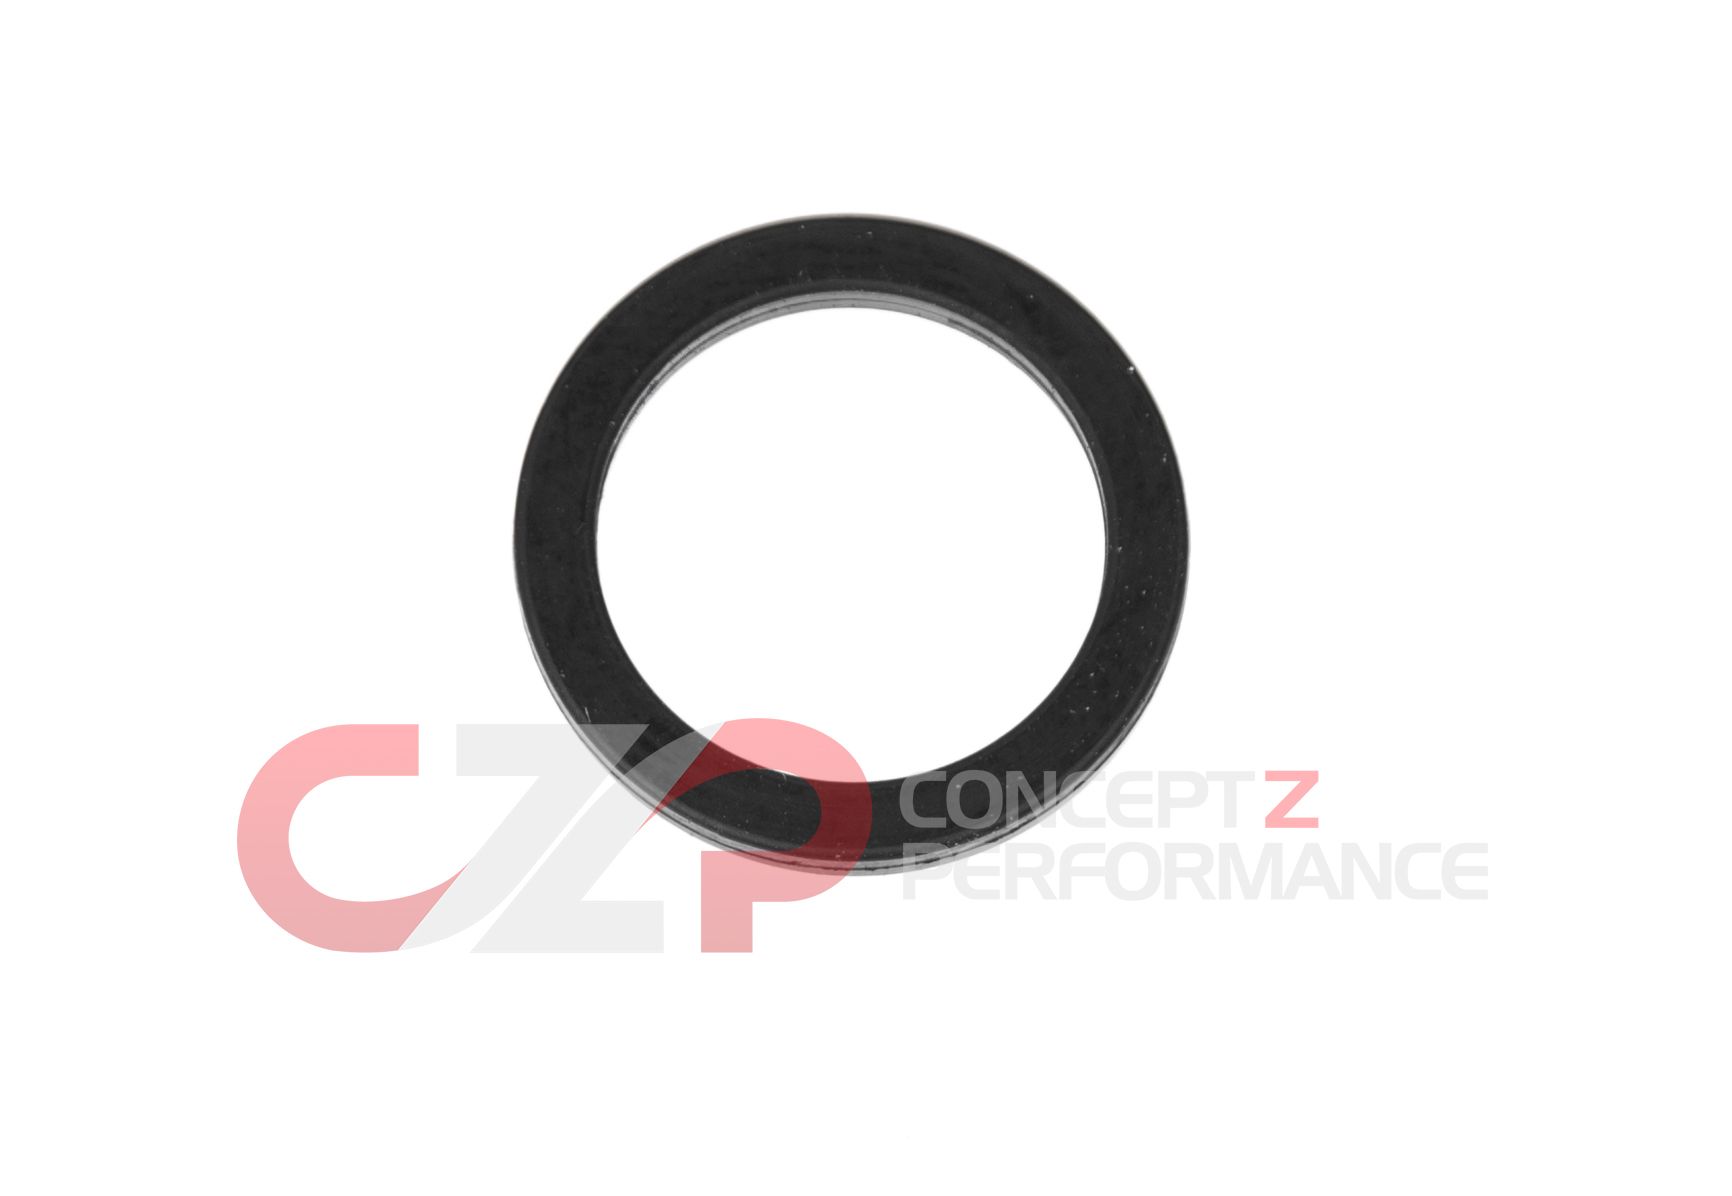 Stoptech Internal Crossover O-Ring Seal for ST Calipers